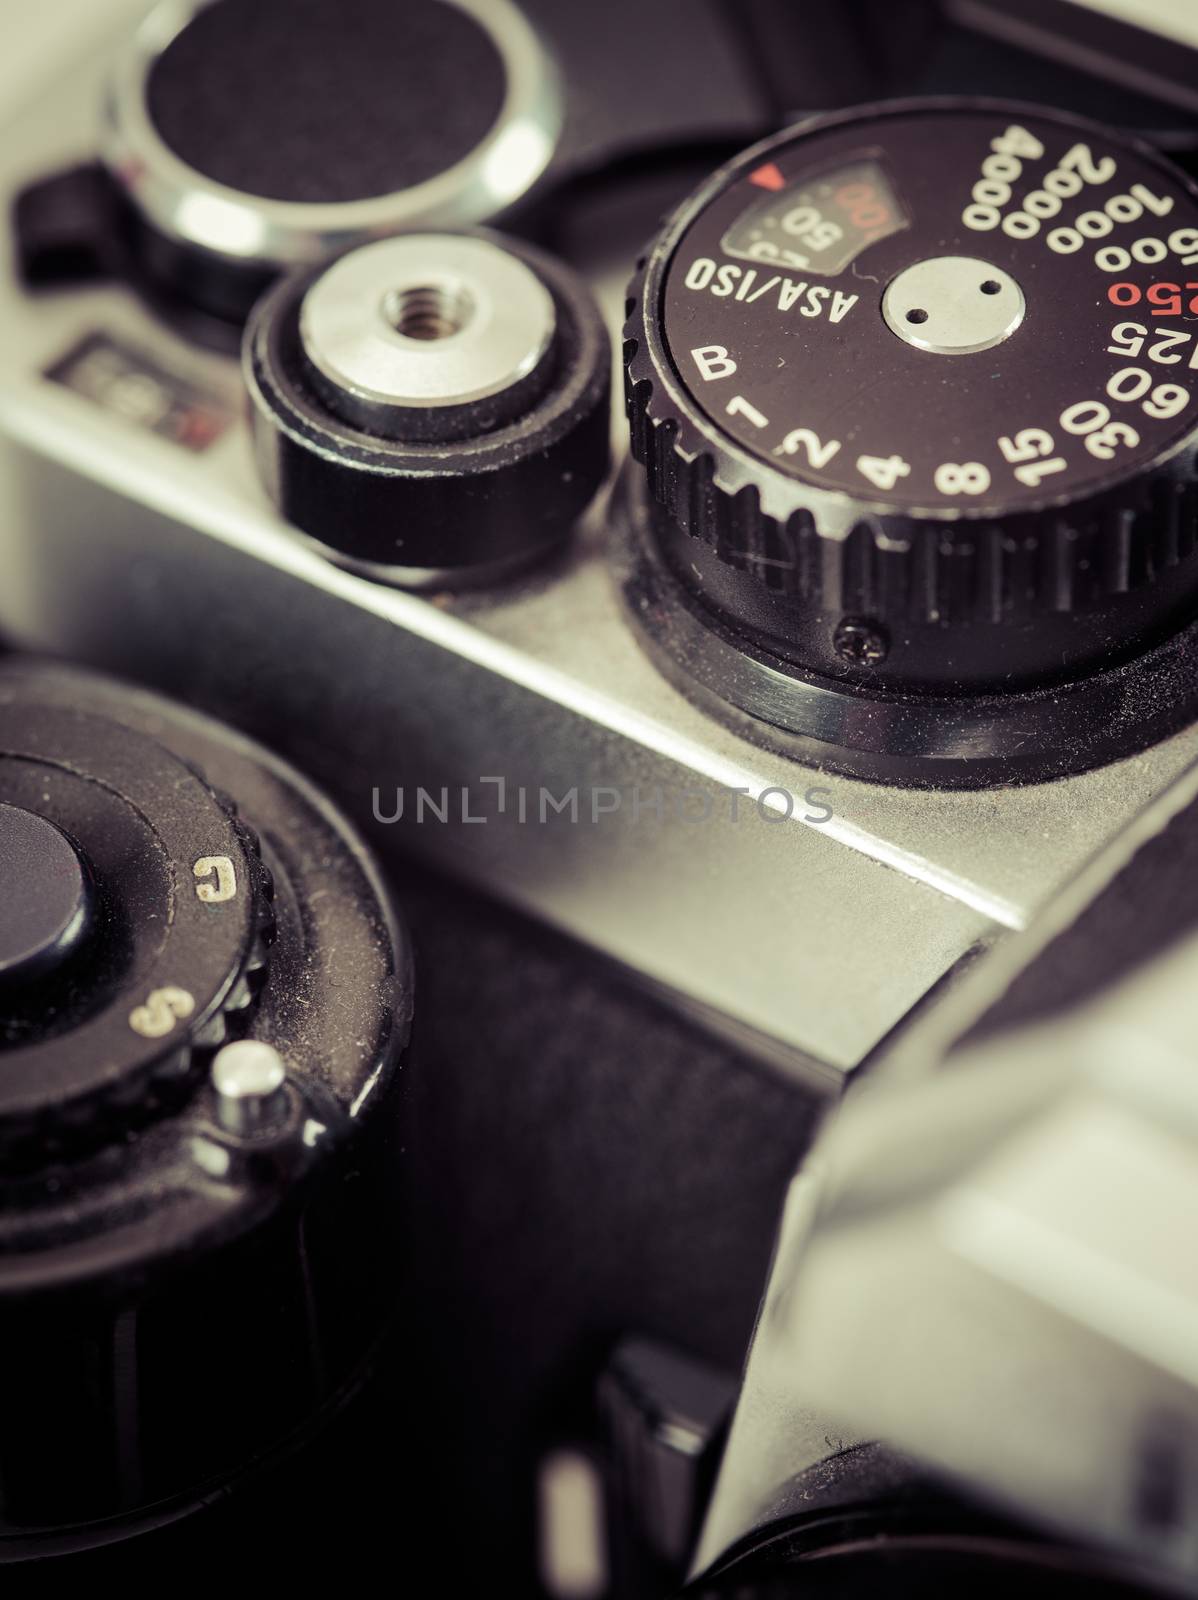 Macro photo of the shutter knob and shutter release of an old 35mm film camera. Filtered to look vintage.